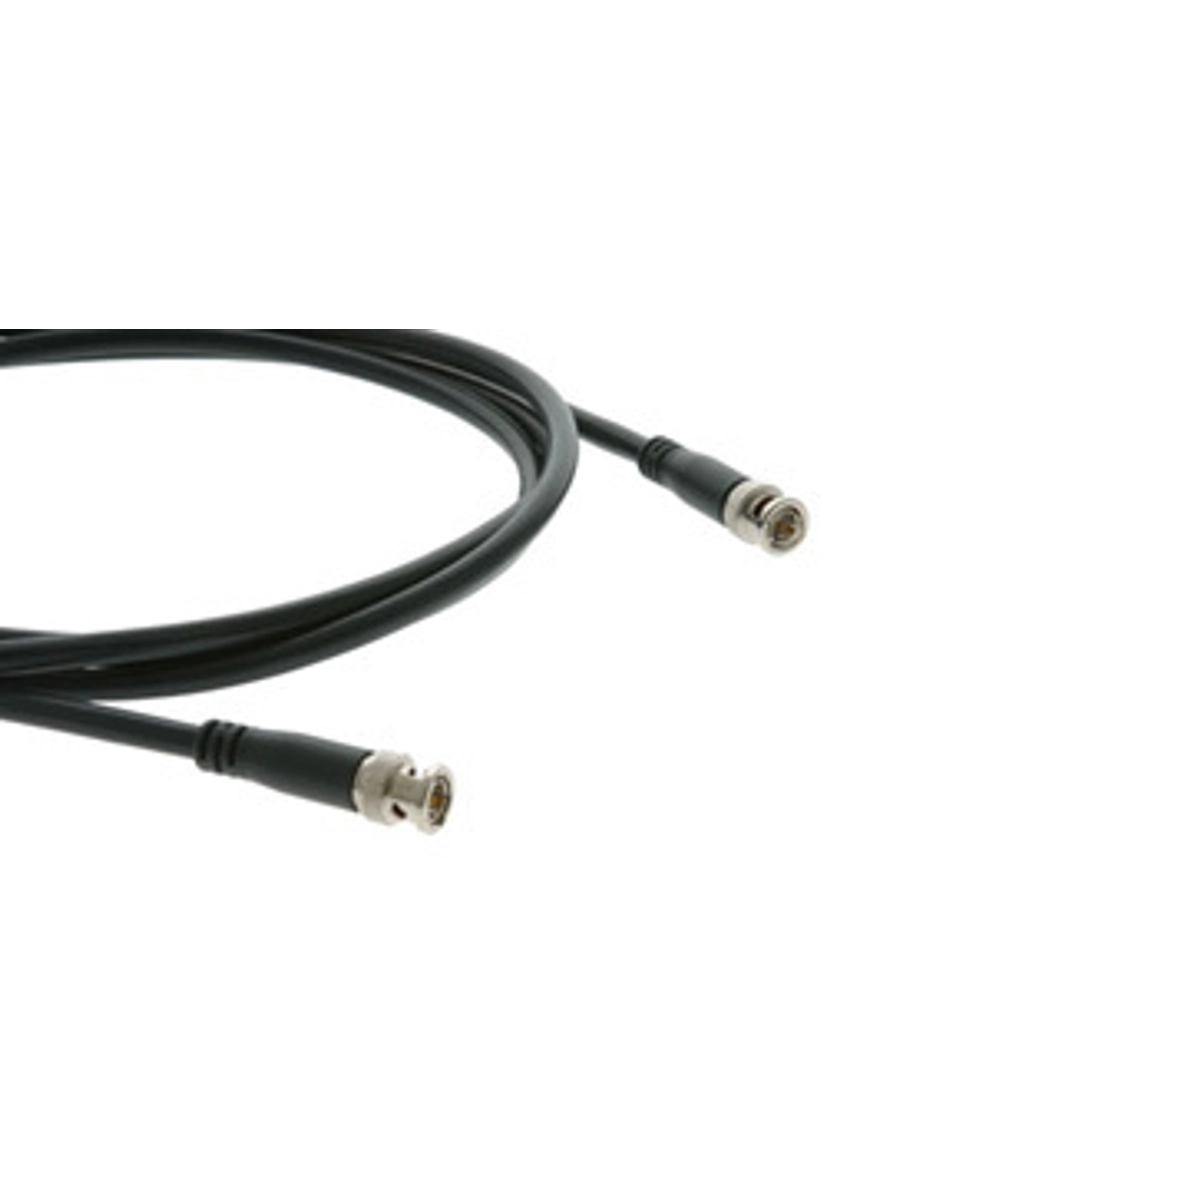 1 BNC To 1 BNC RG-6 Video Cable - 3ft